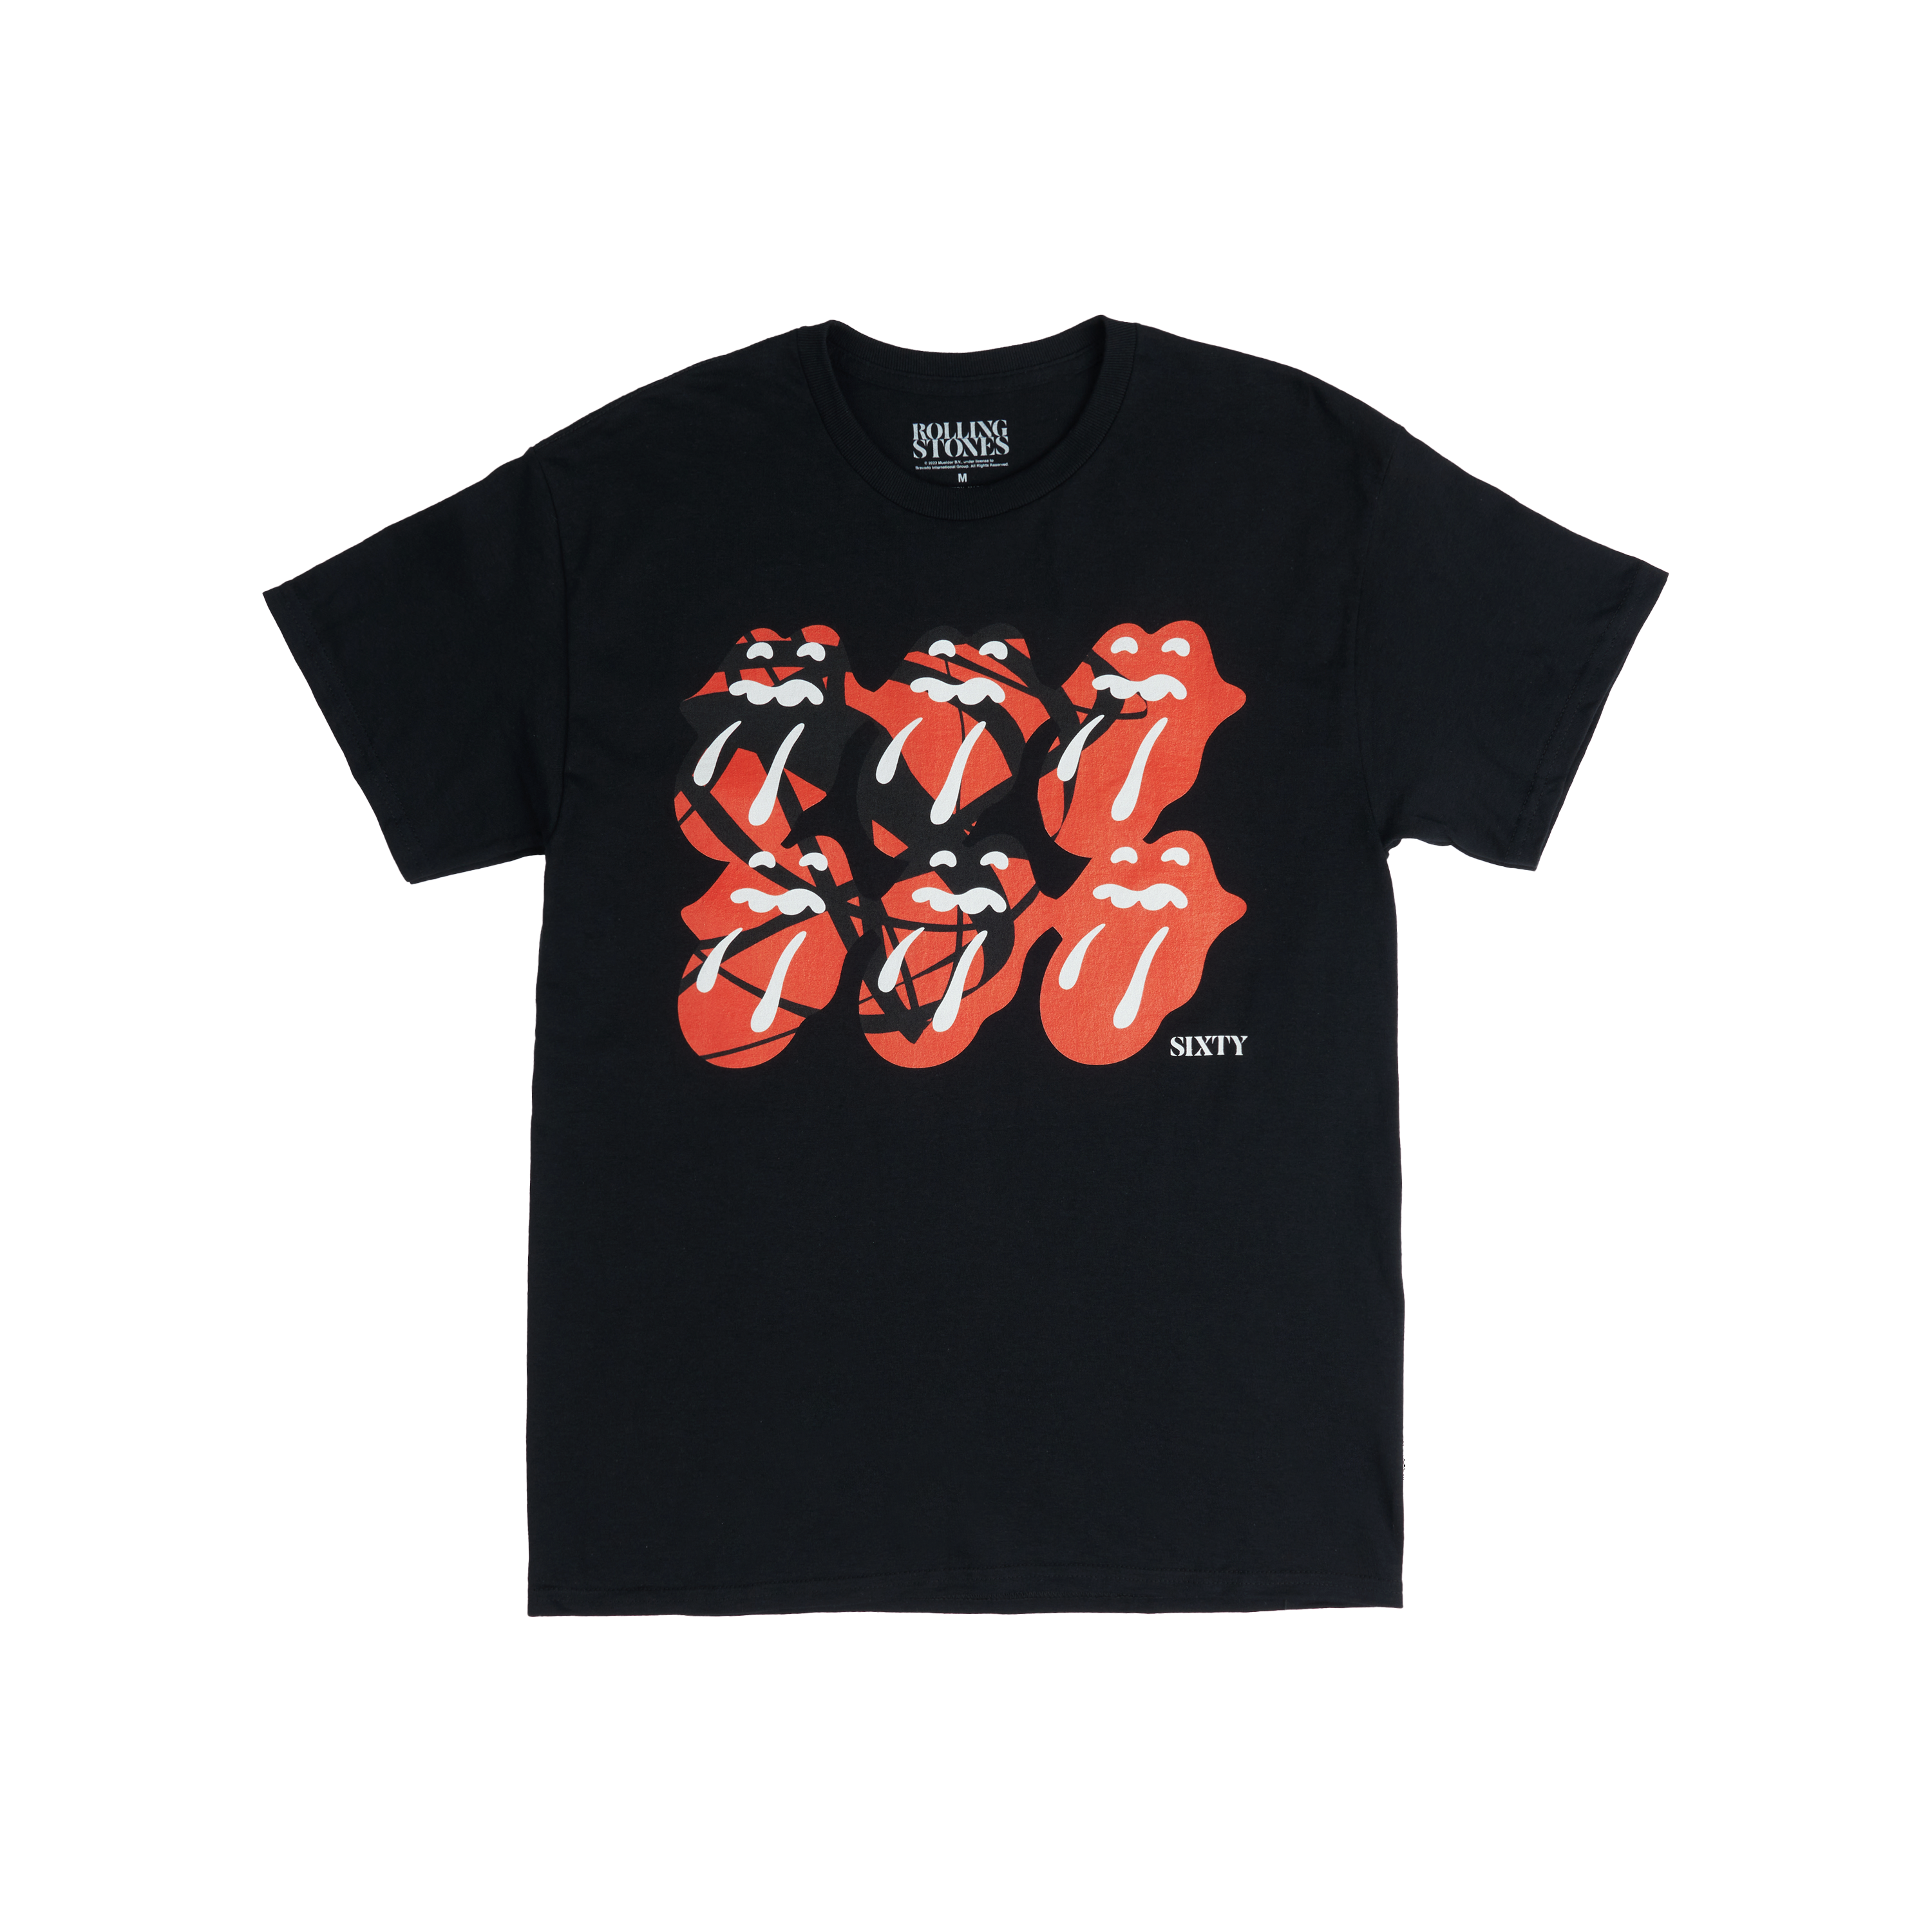 The Rolling Stones - Sixty Multi Tongue Tour T-Shirt